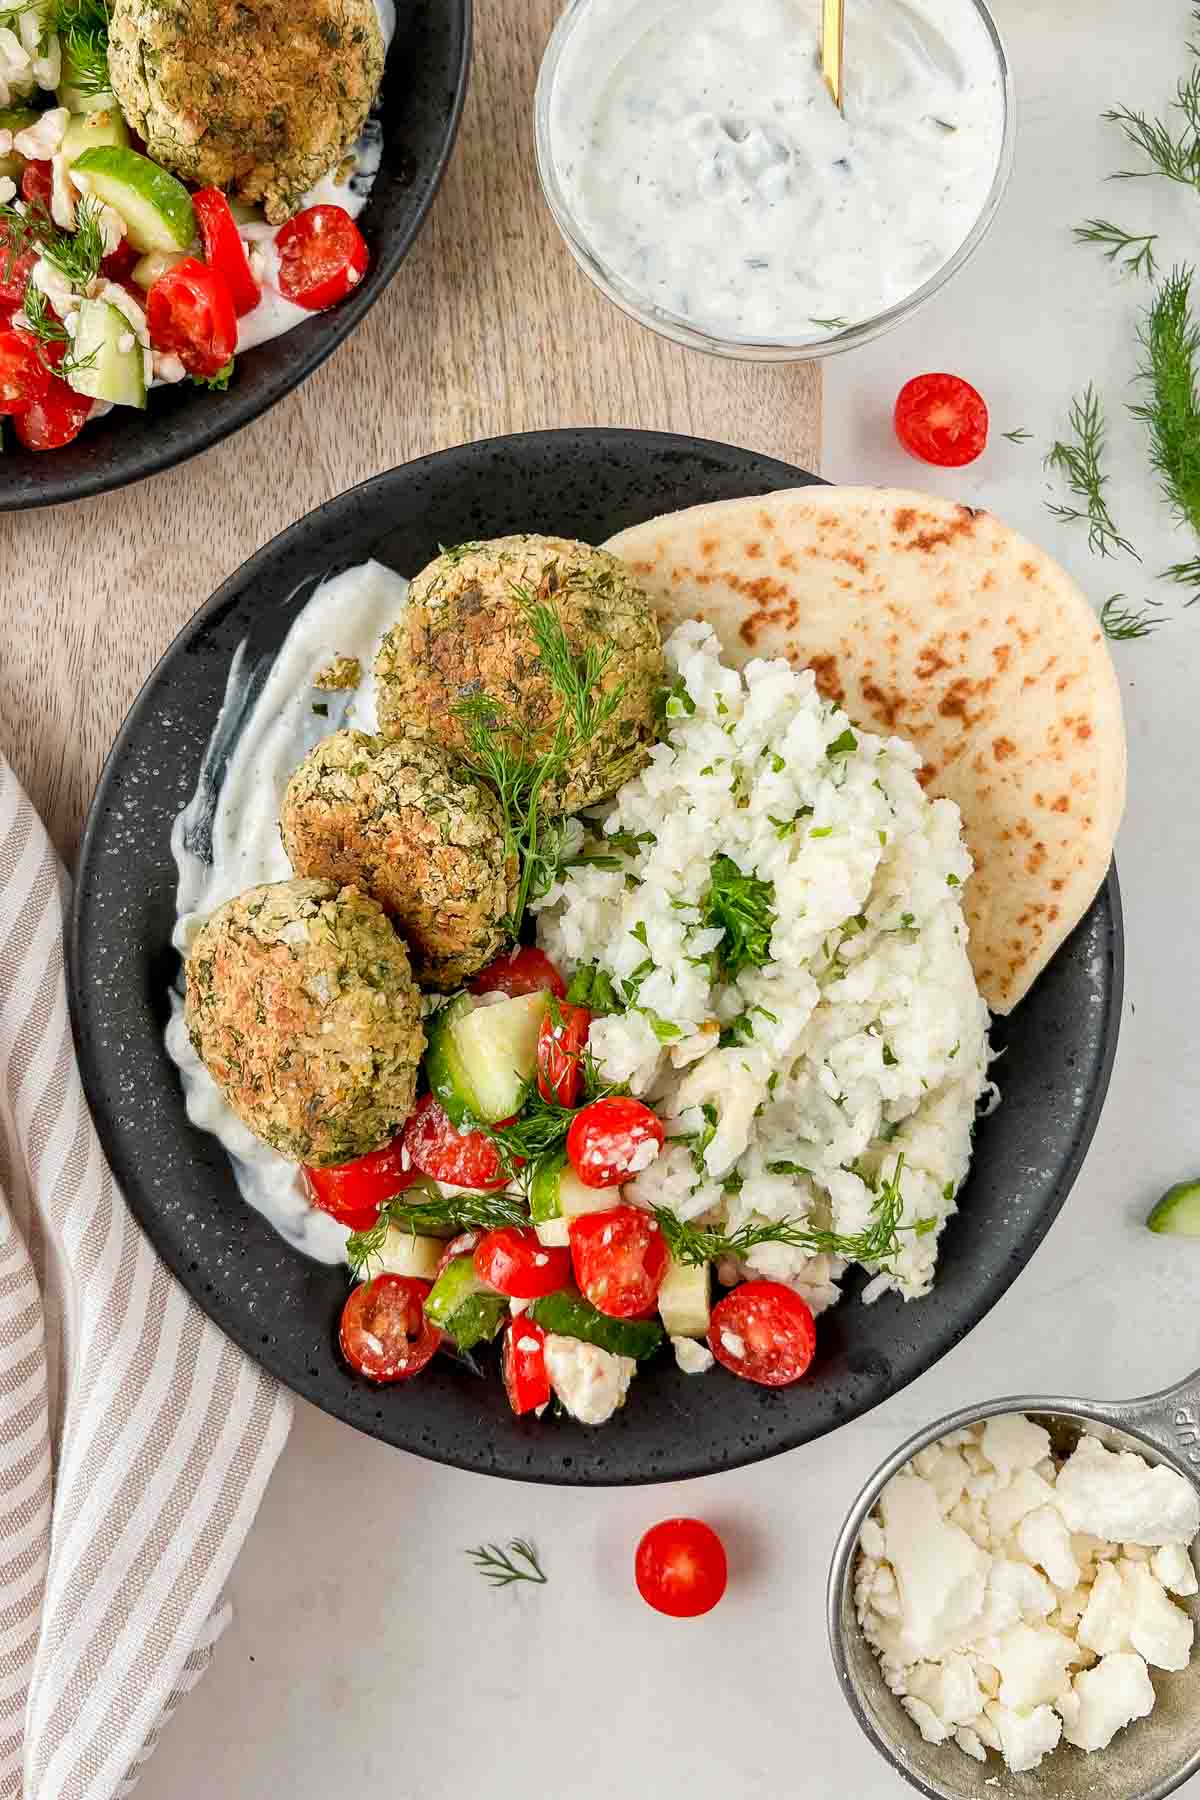 falafel rice bowl garnished with cucumber tomato salad, dill and served with pita.